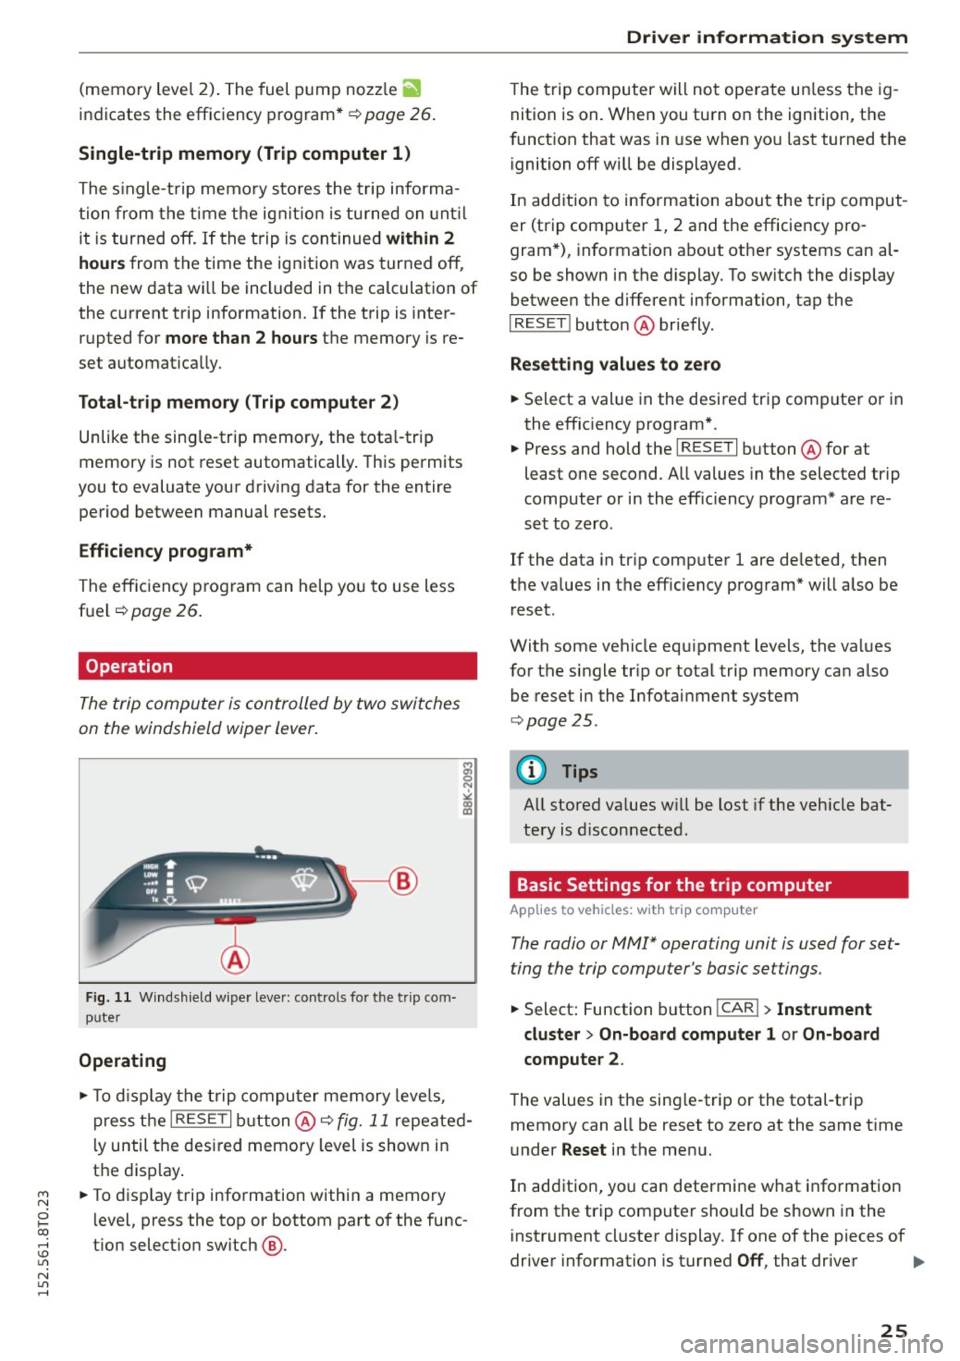 AUDI A5 COUPE 2015  Owners Manual M N 
i? co ,...., \!) 1.11 
N 1.11 ,...., 
(memory  level  2). The fuel  pump  nozz le iii 
indicates  the  efficiency  program*¢ page 26. 
Single-t rip memory  (Trip  computer  1 ) 
The single -t 